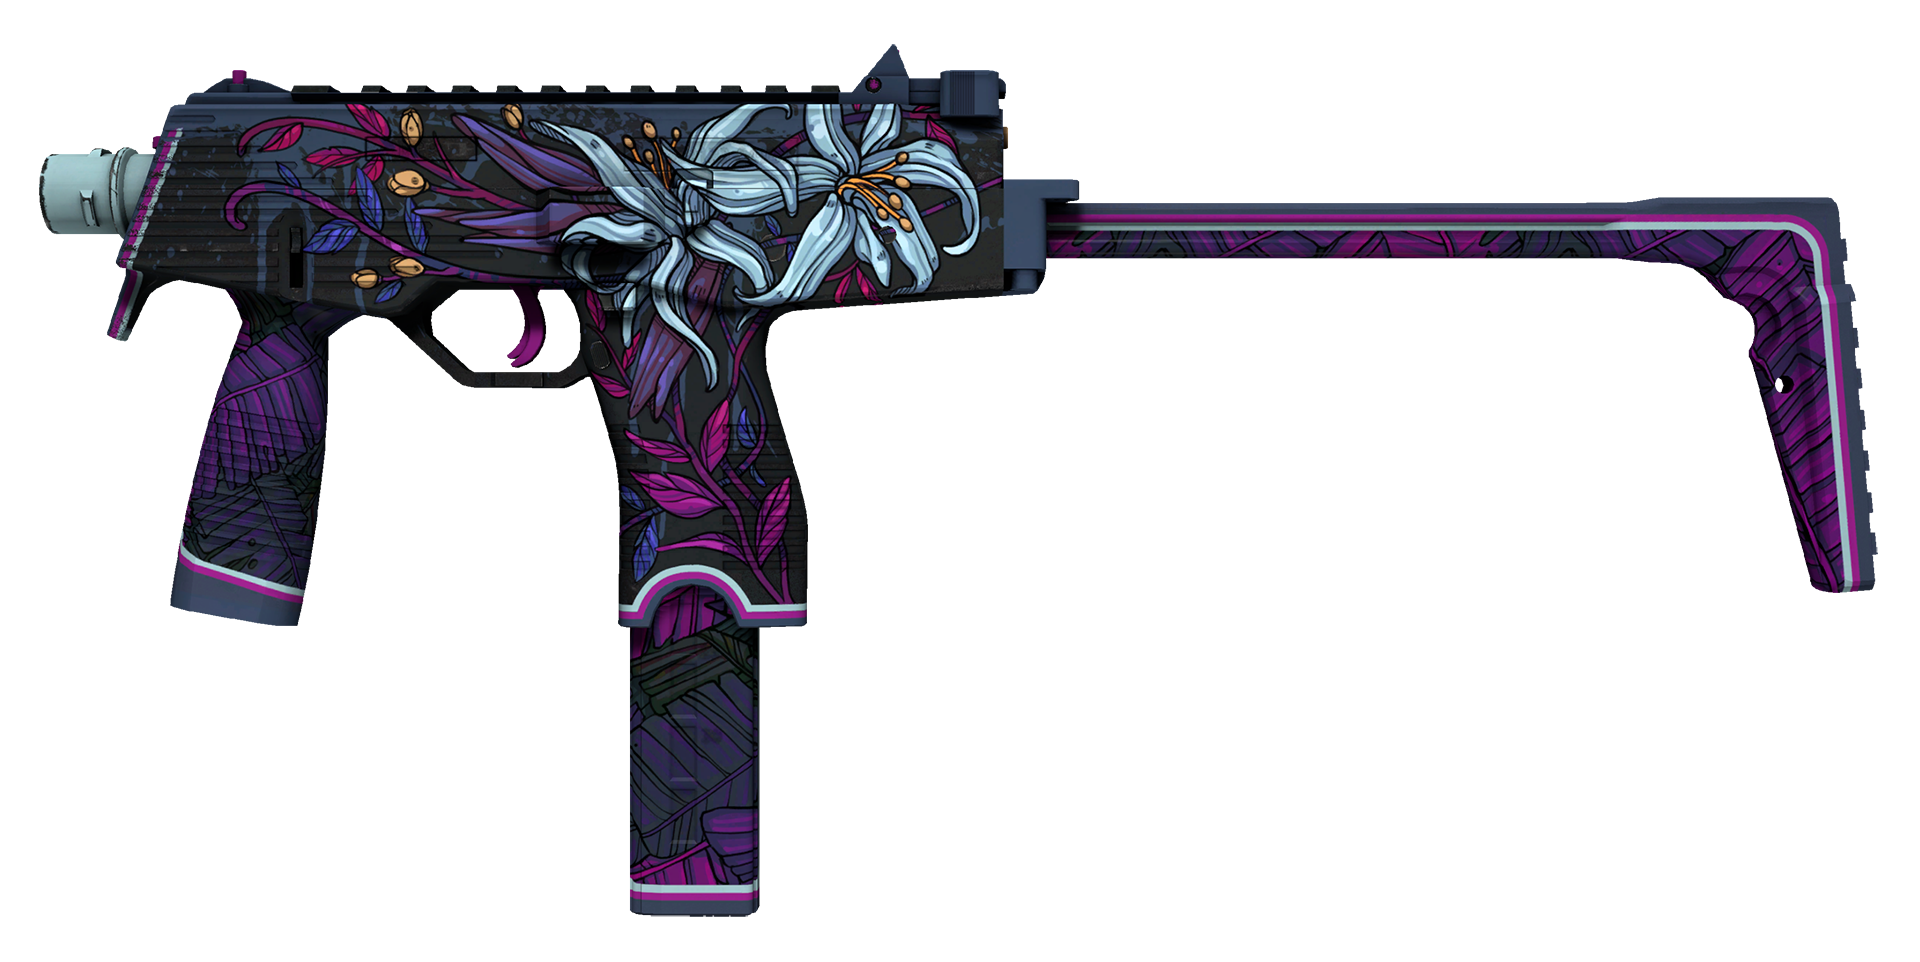 M4A4 Spider Lily cs go skin download the last version for ipod